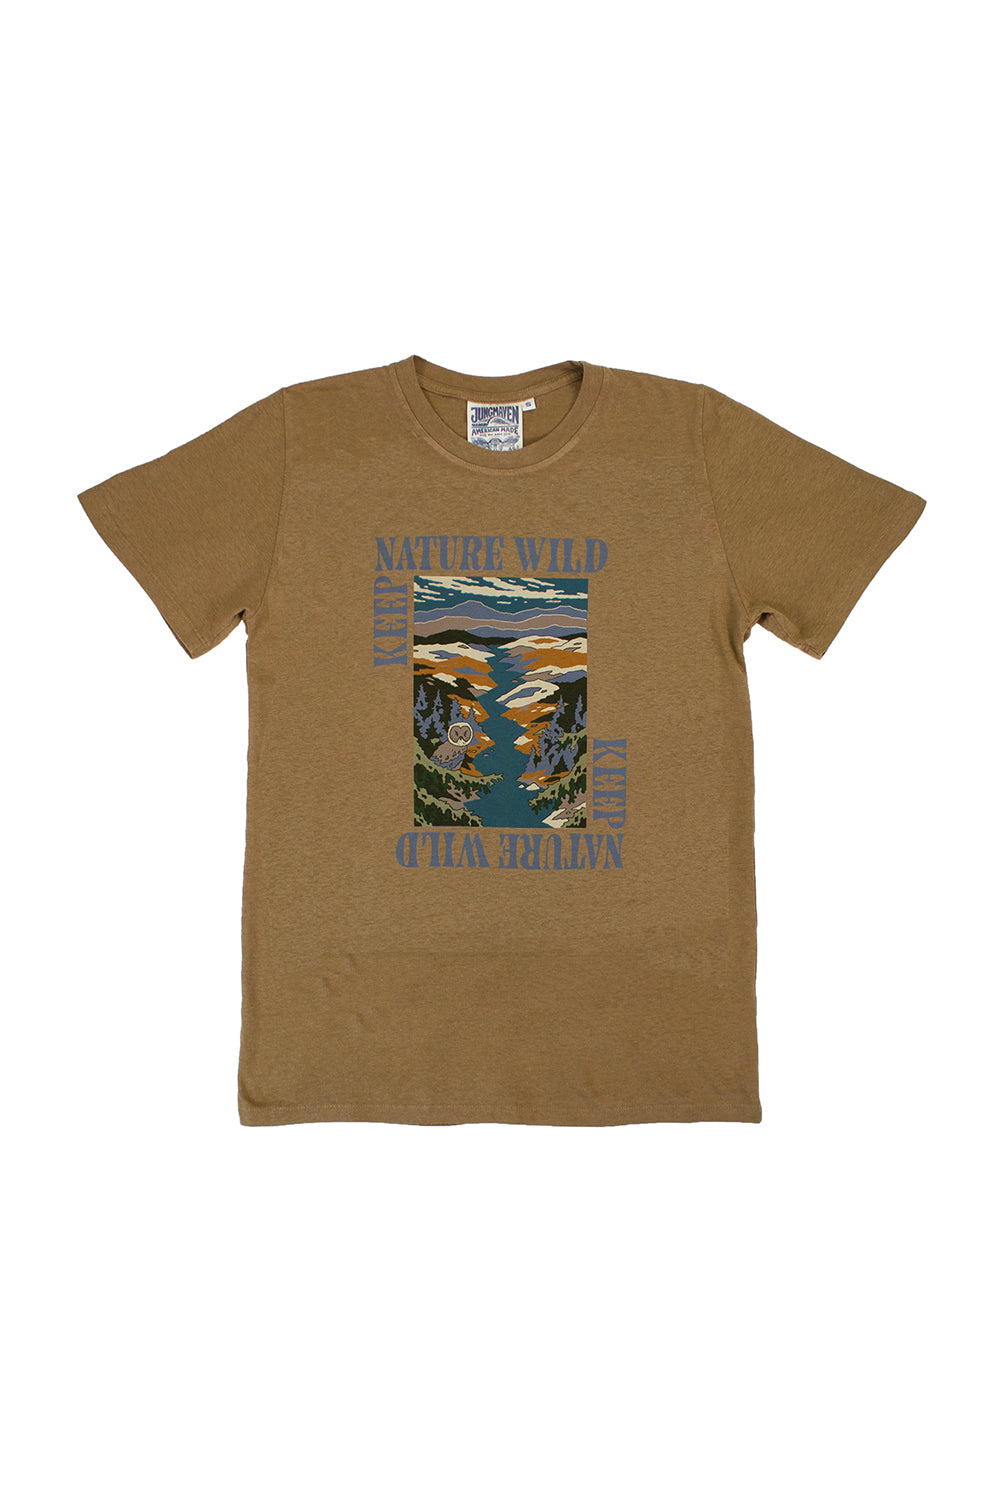 Keep Nature Wild Jung Tee | Jungmaven Hemp Clothing & Accessories / Color: Coyote